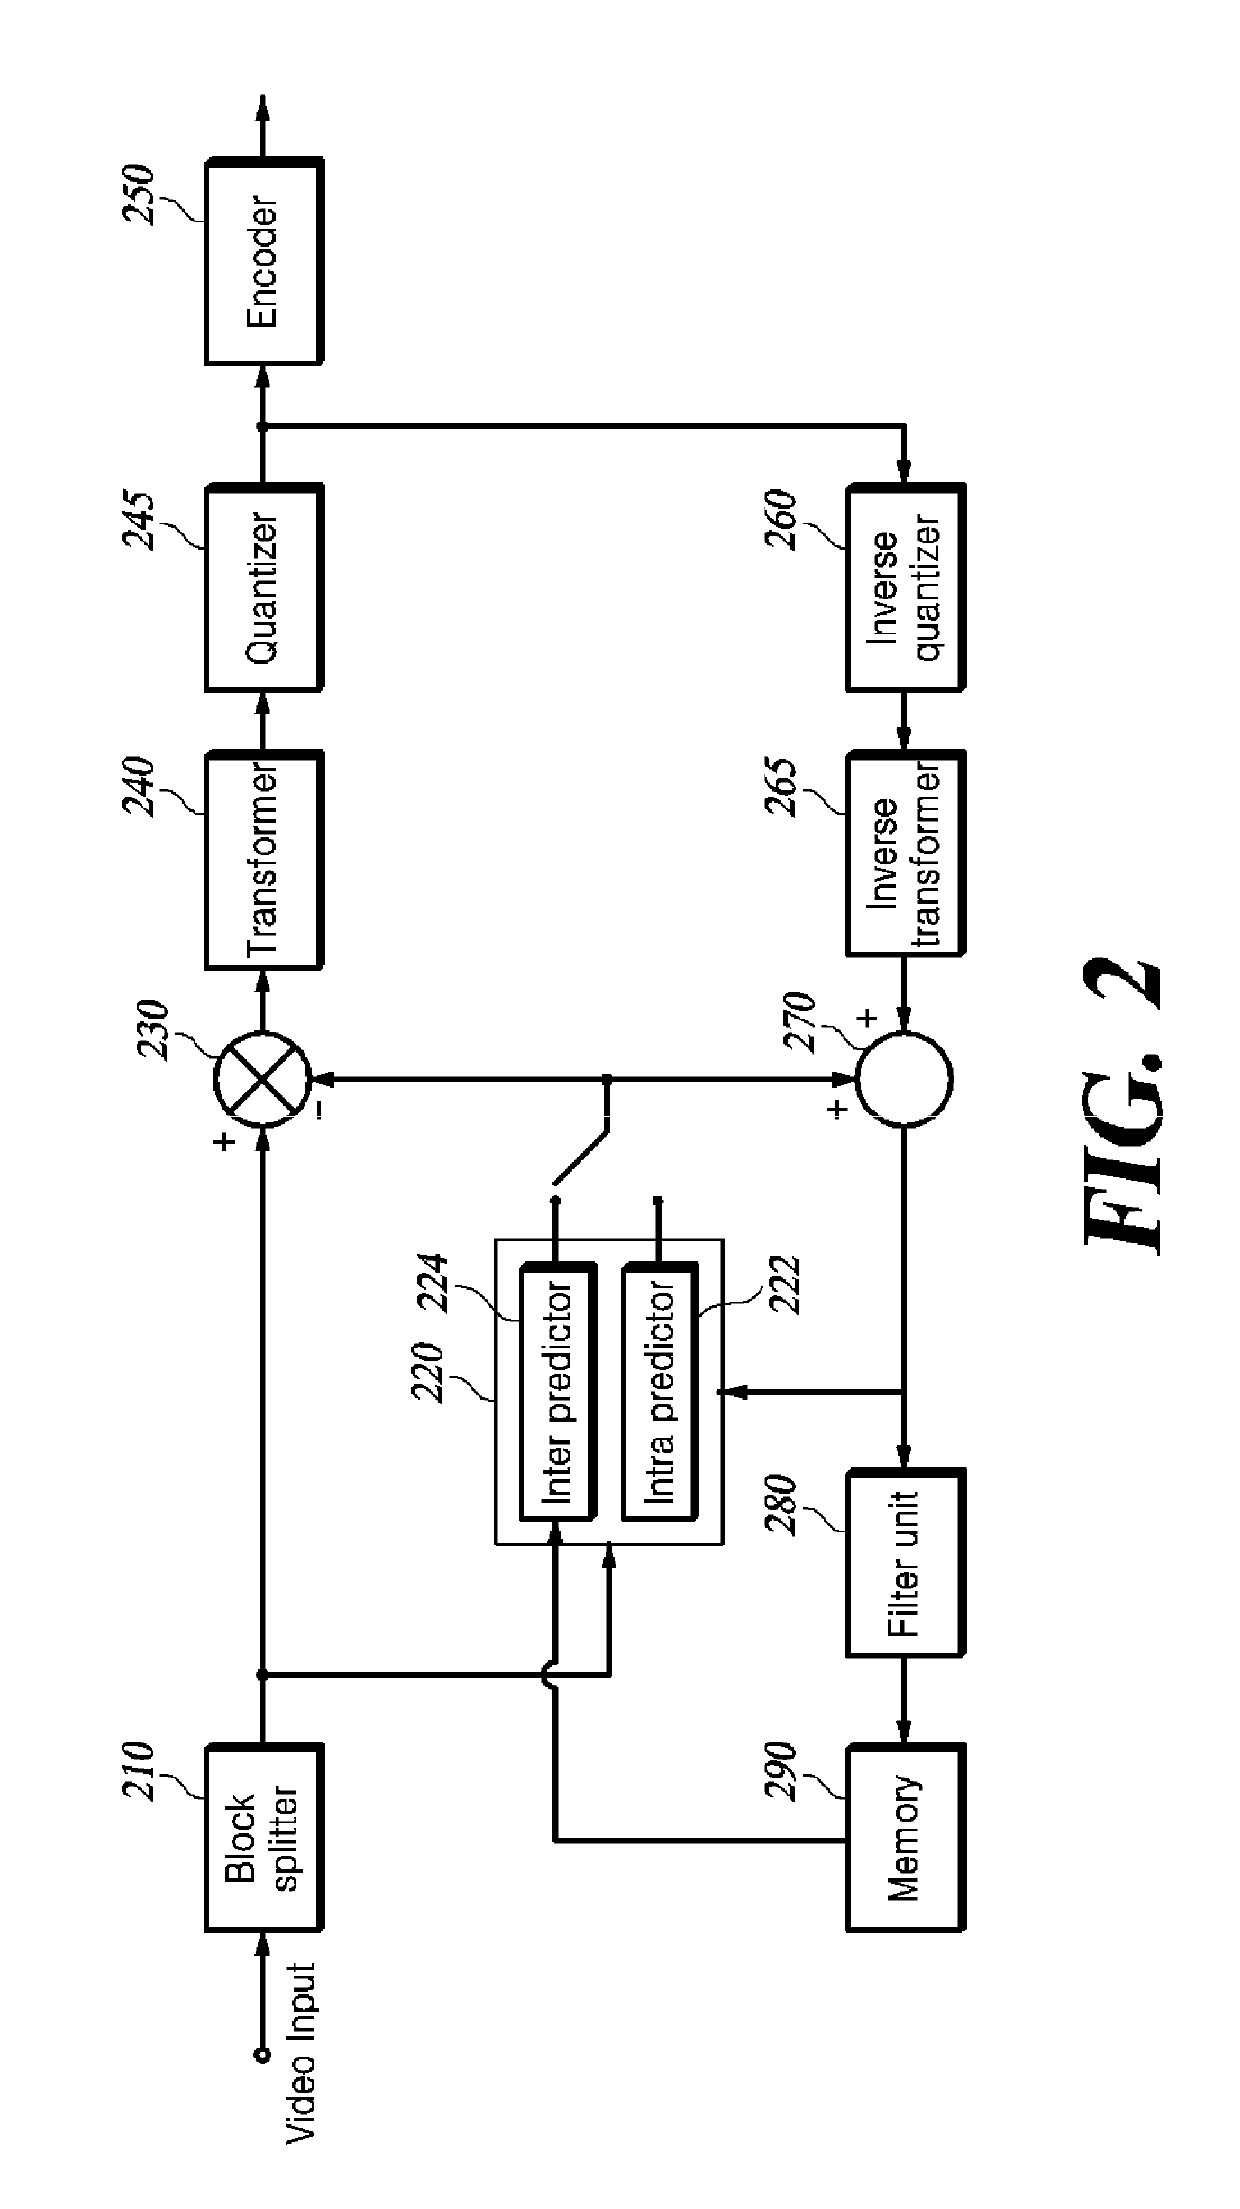 Apparatus and method for video encoding or decoding